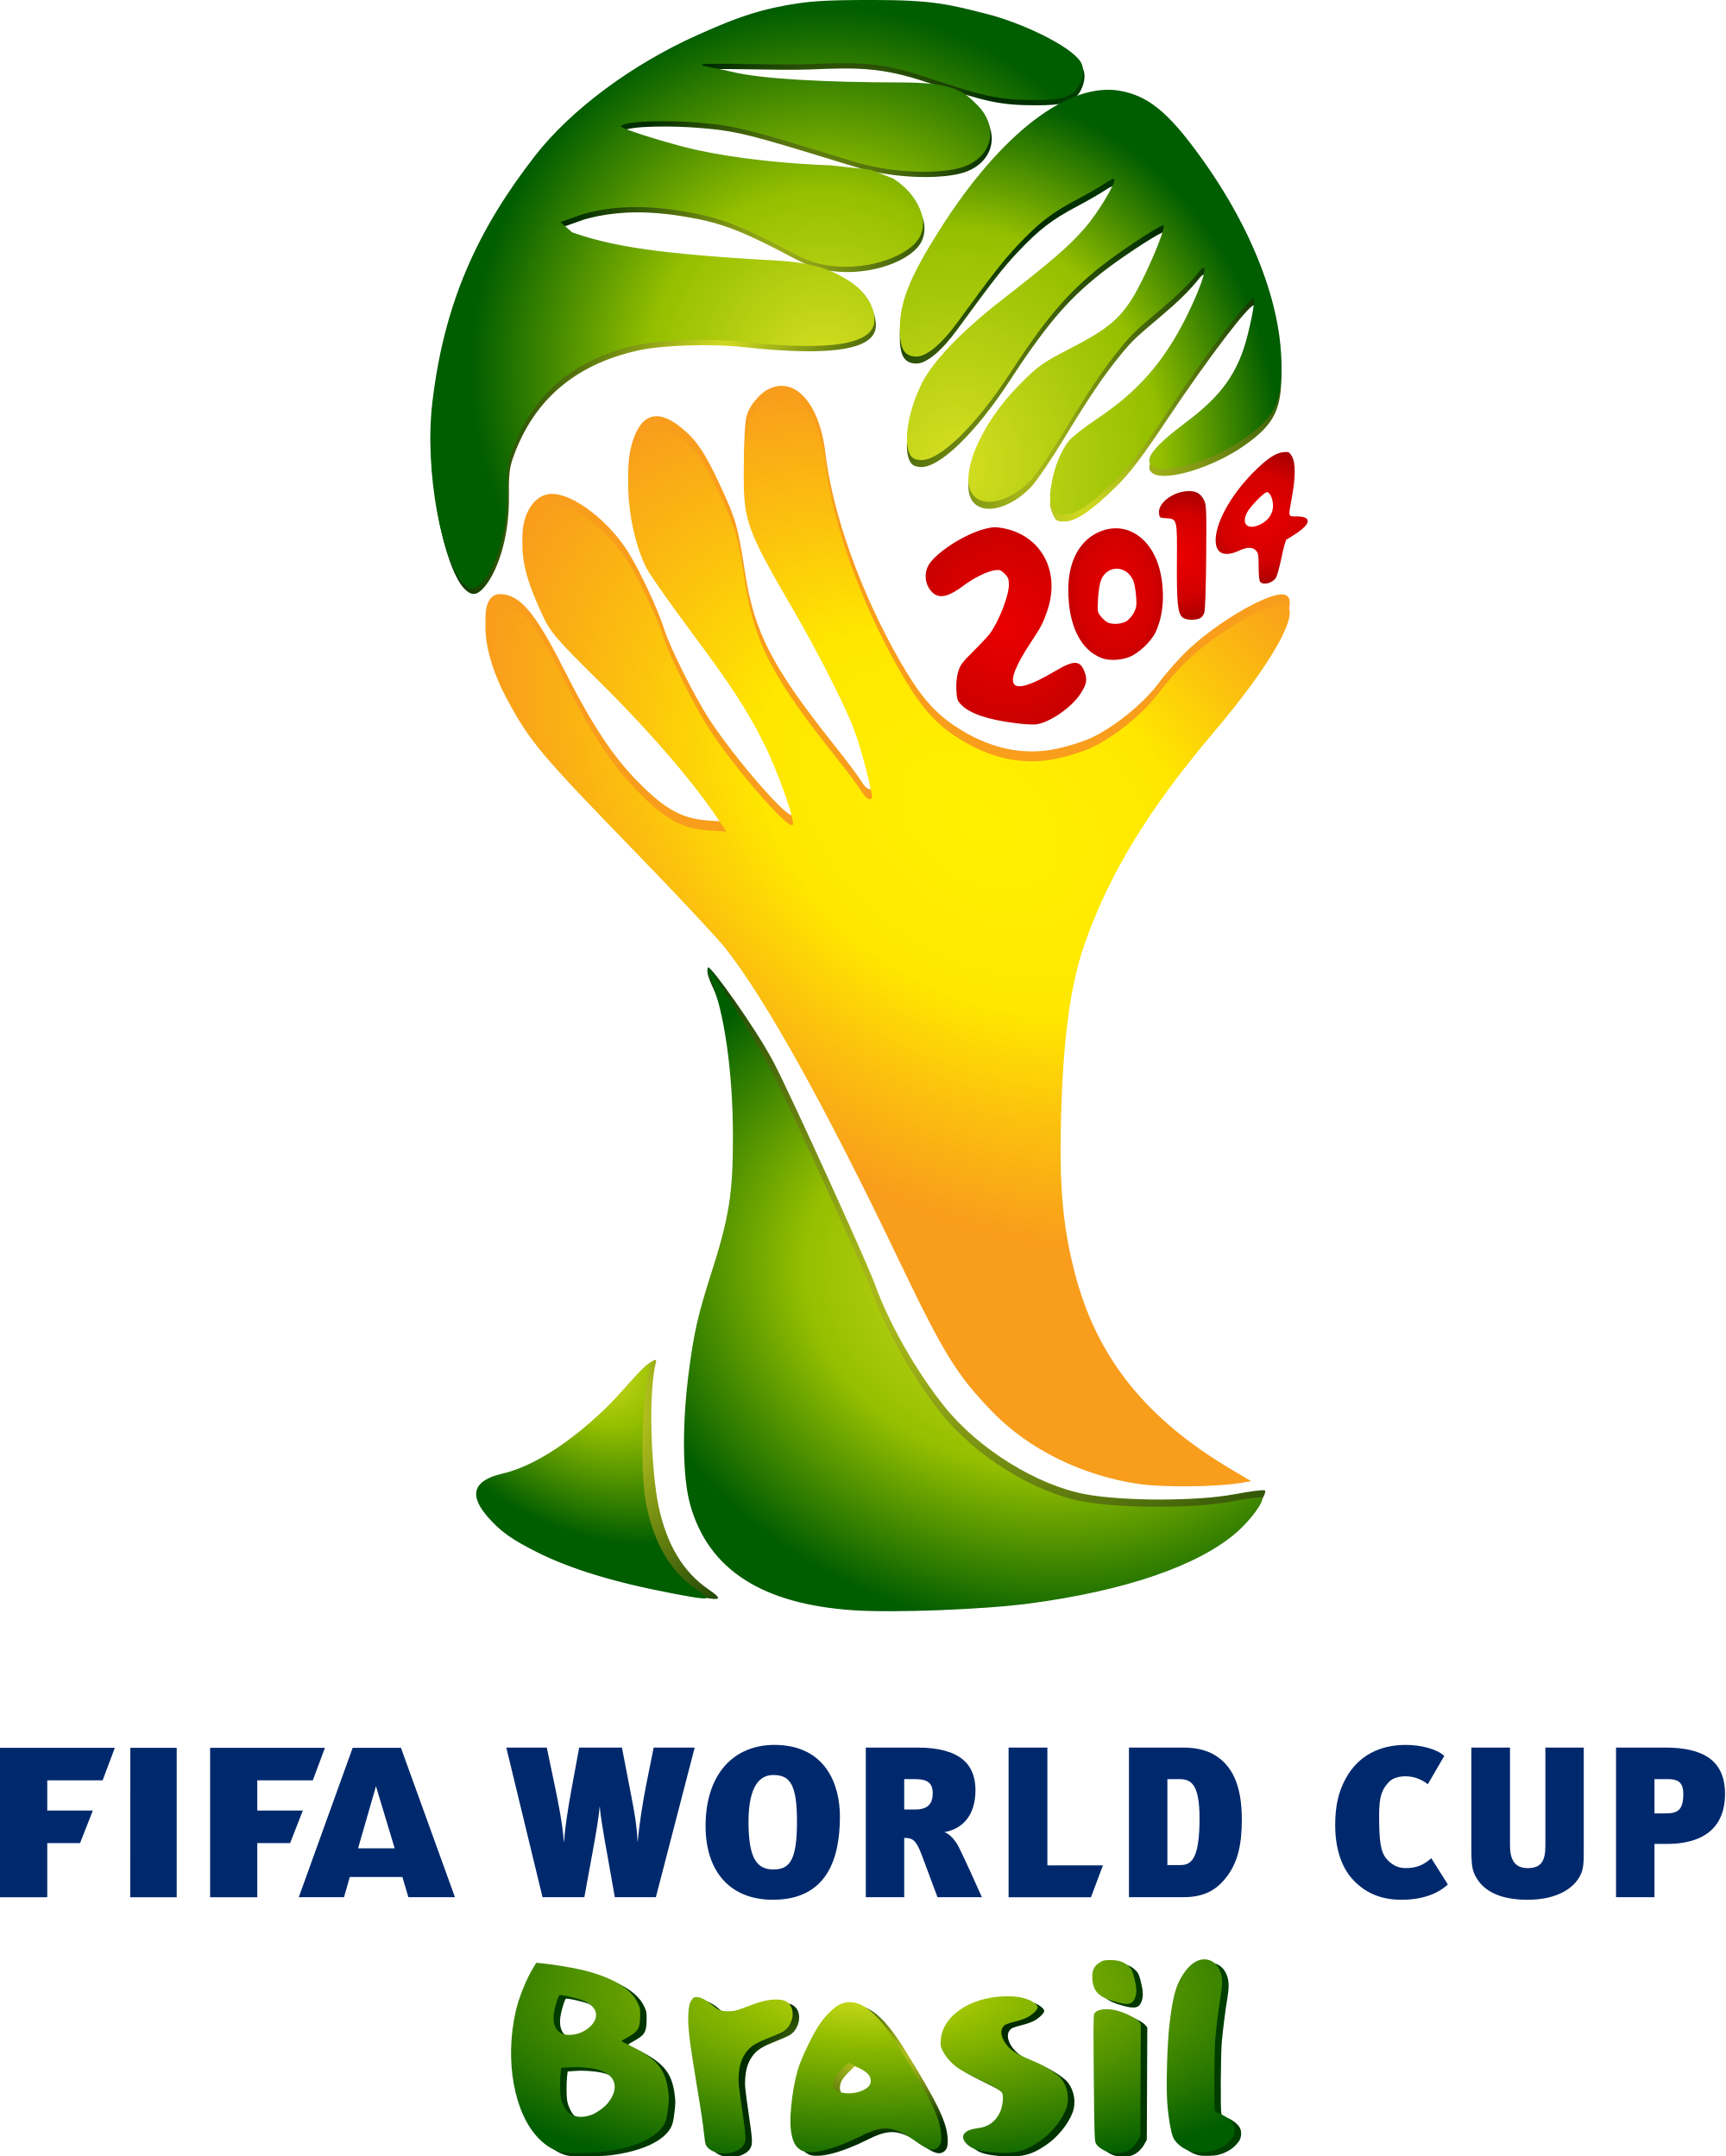 Download 2014 World Cup Logo In High Resolution Wallpapers ...